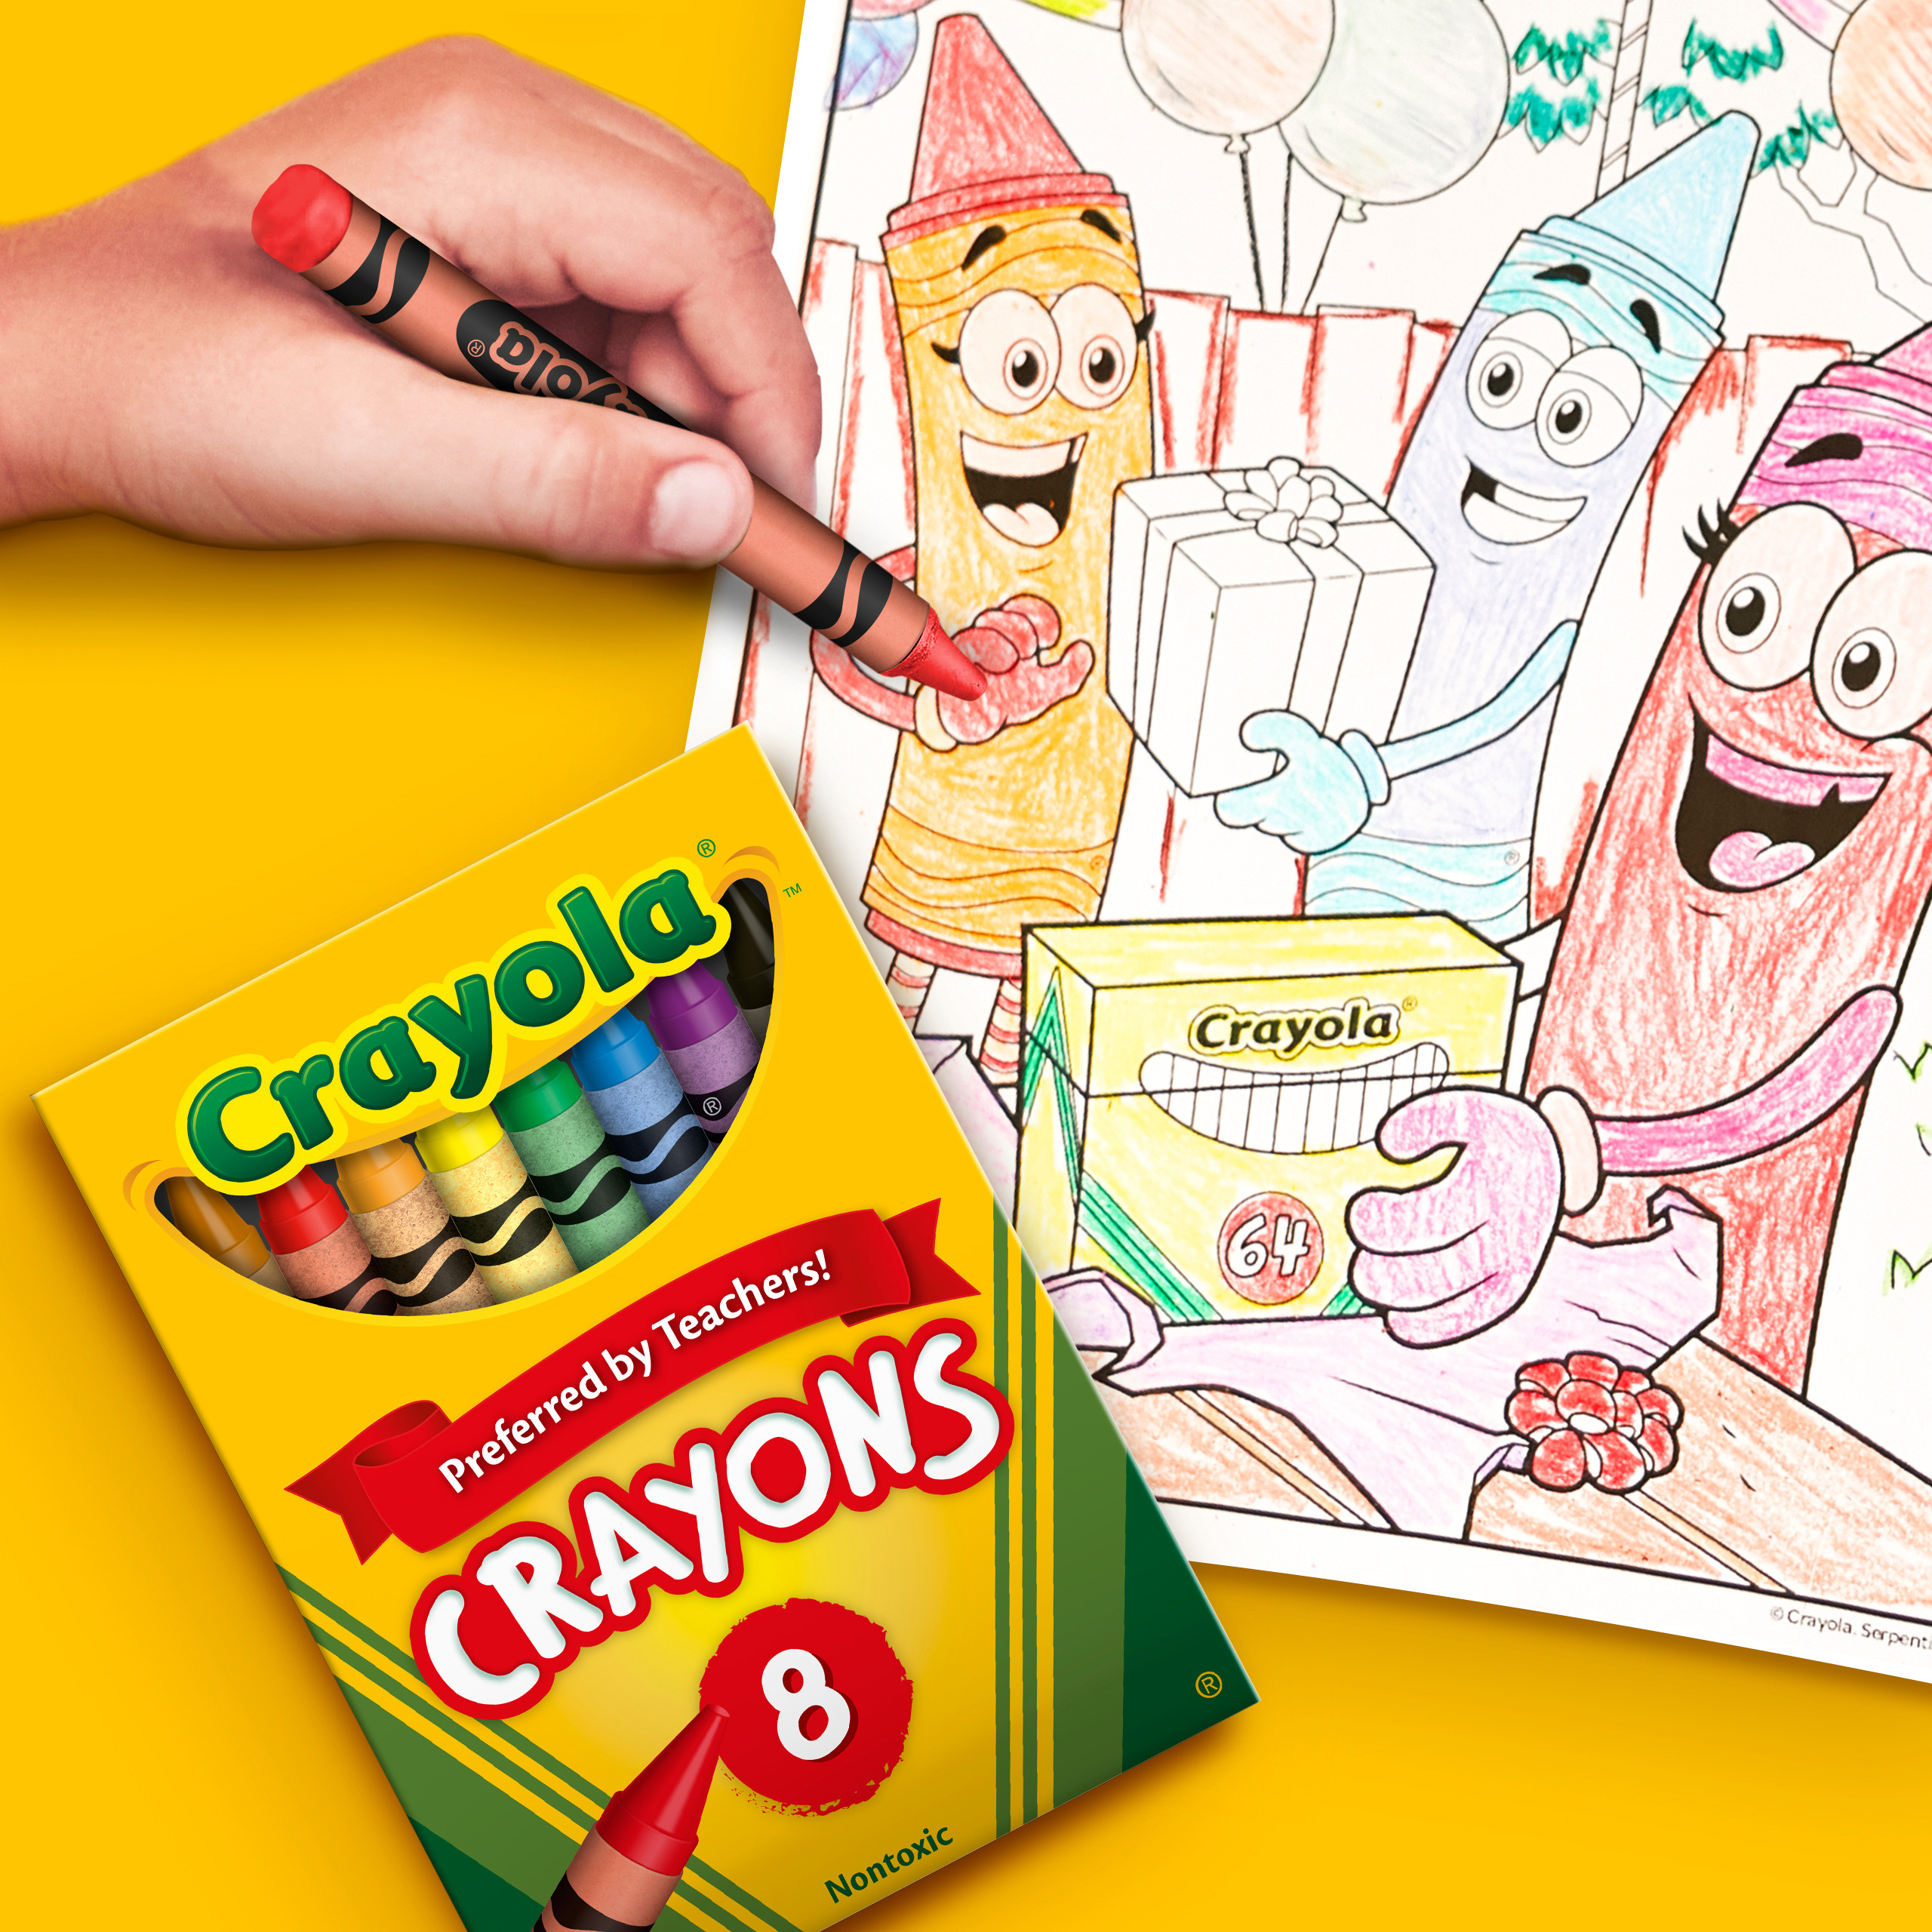 Crayola Classic Crayons, Back to School Supplies for Kids, 8 Ct, Art Supplies - image 7 of 10